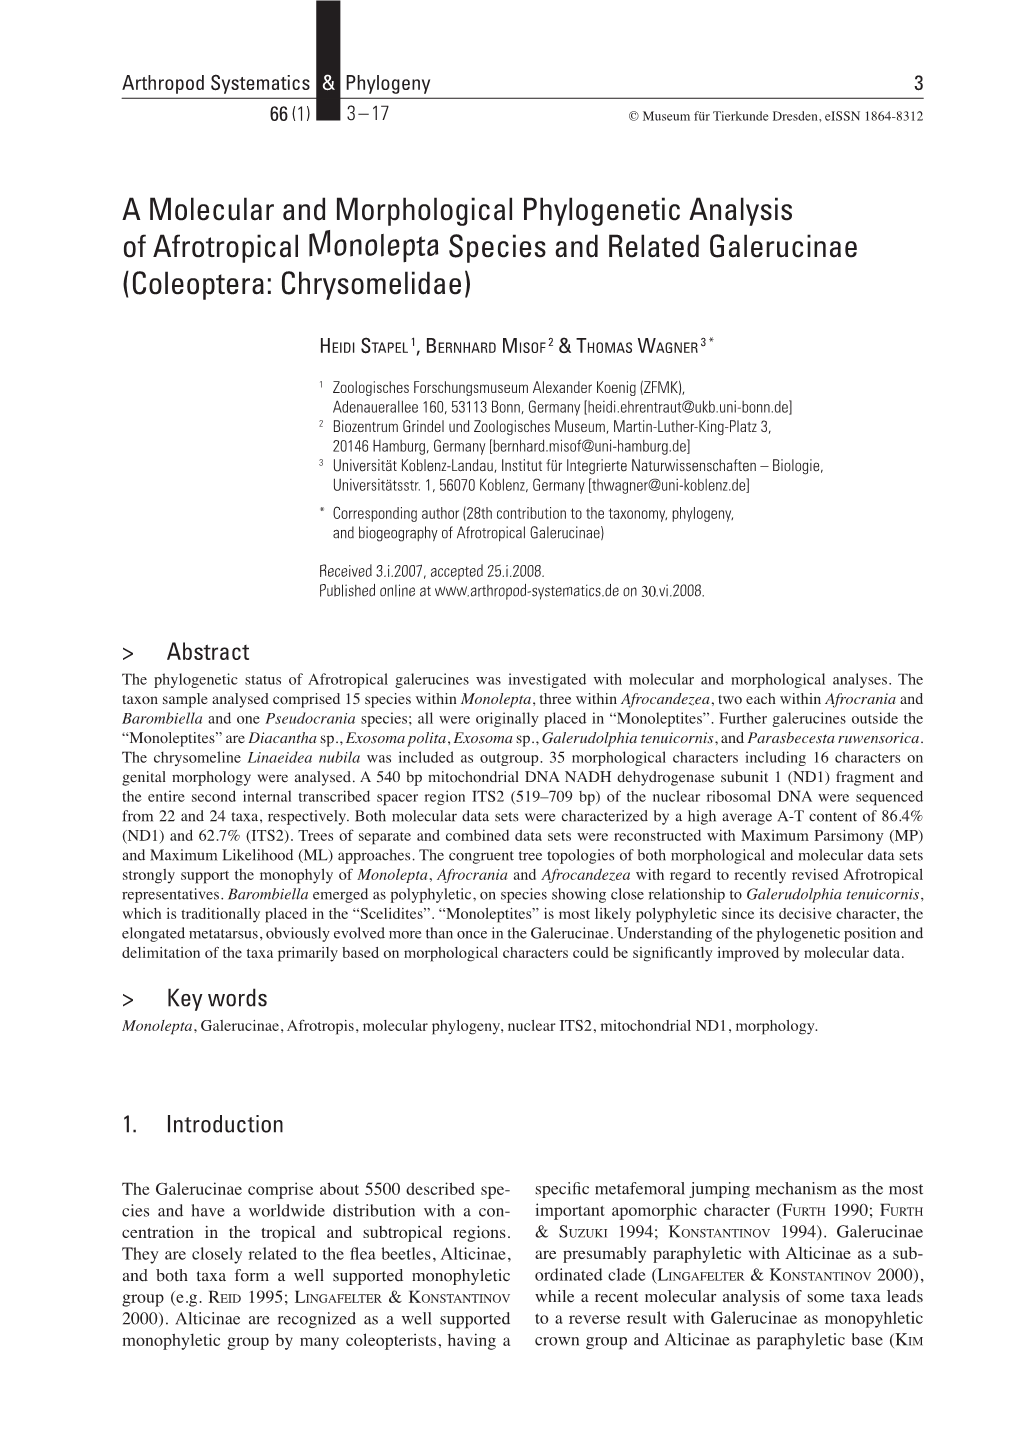 A Molecular and Morphological Phylogenetic Analysis of Afrotropical Monolepta Species and Related Galerucinae (Coleoptera: Chrysomelidae)